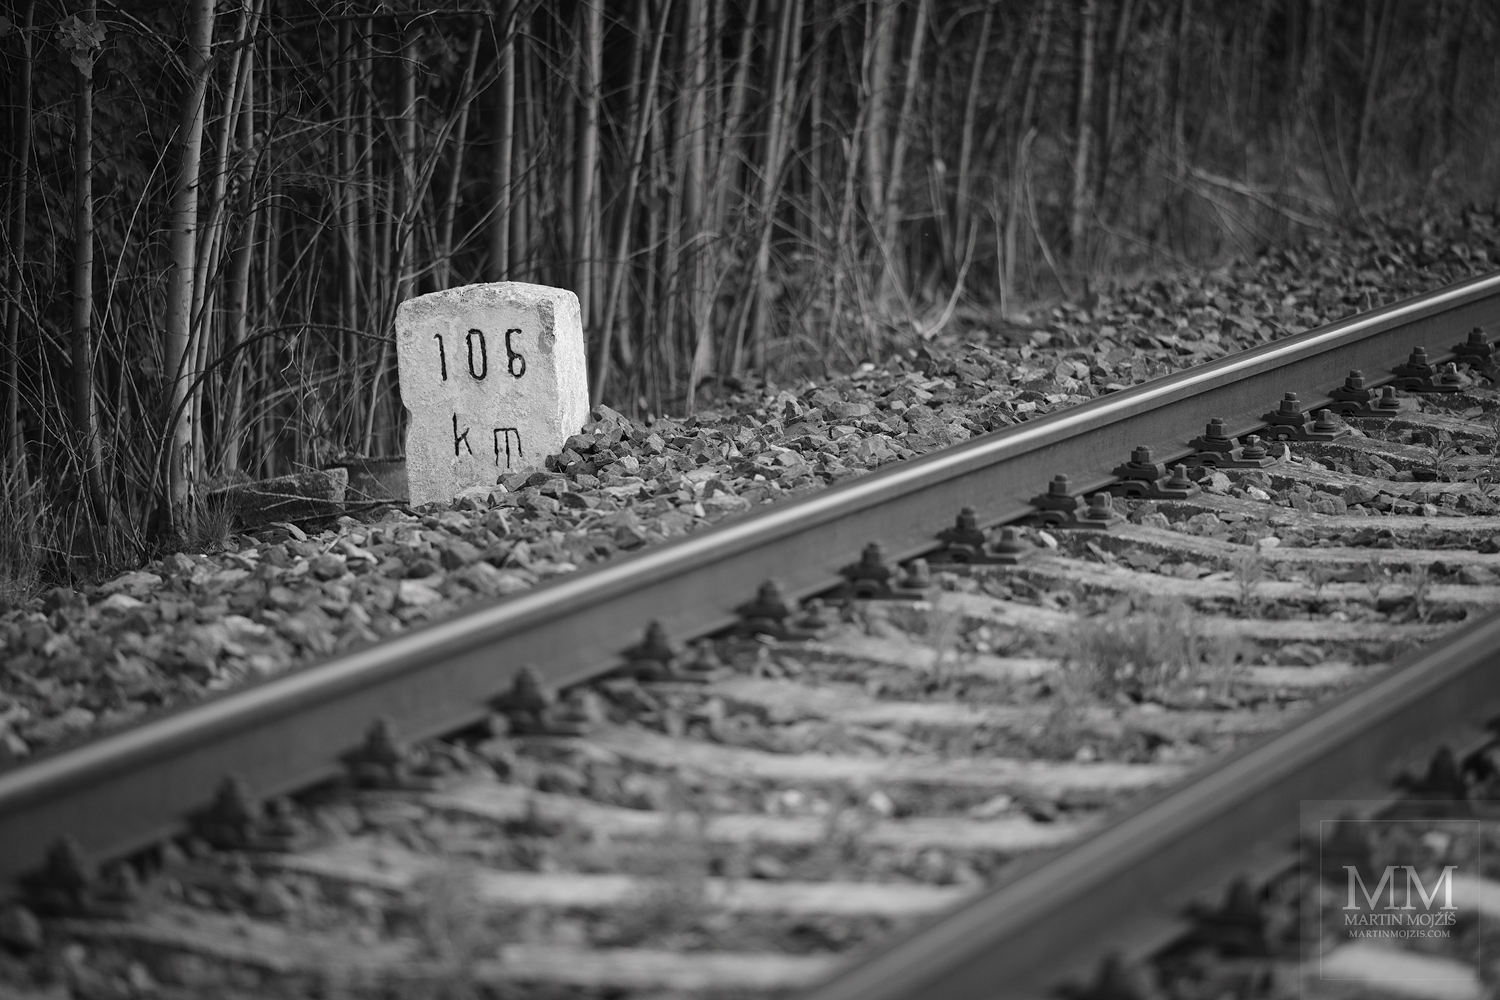 Hectometer stone by the dormitories (rails). Fine art black and white photograph AWAITING OF SUMMER TRAVELS, photographed by Martin Mojzis.